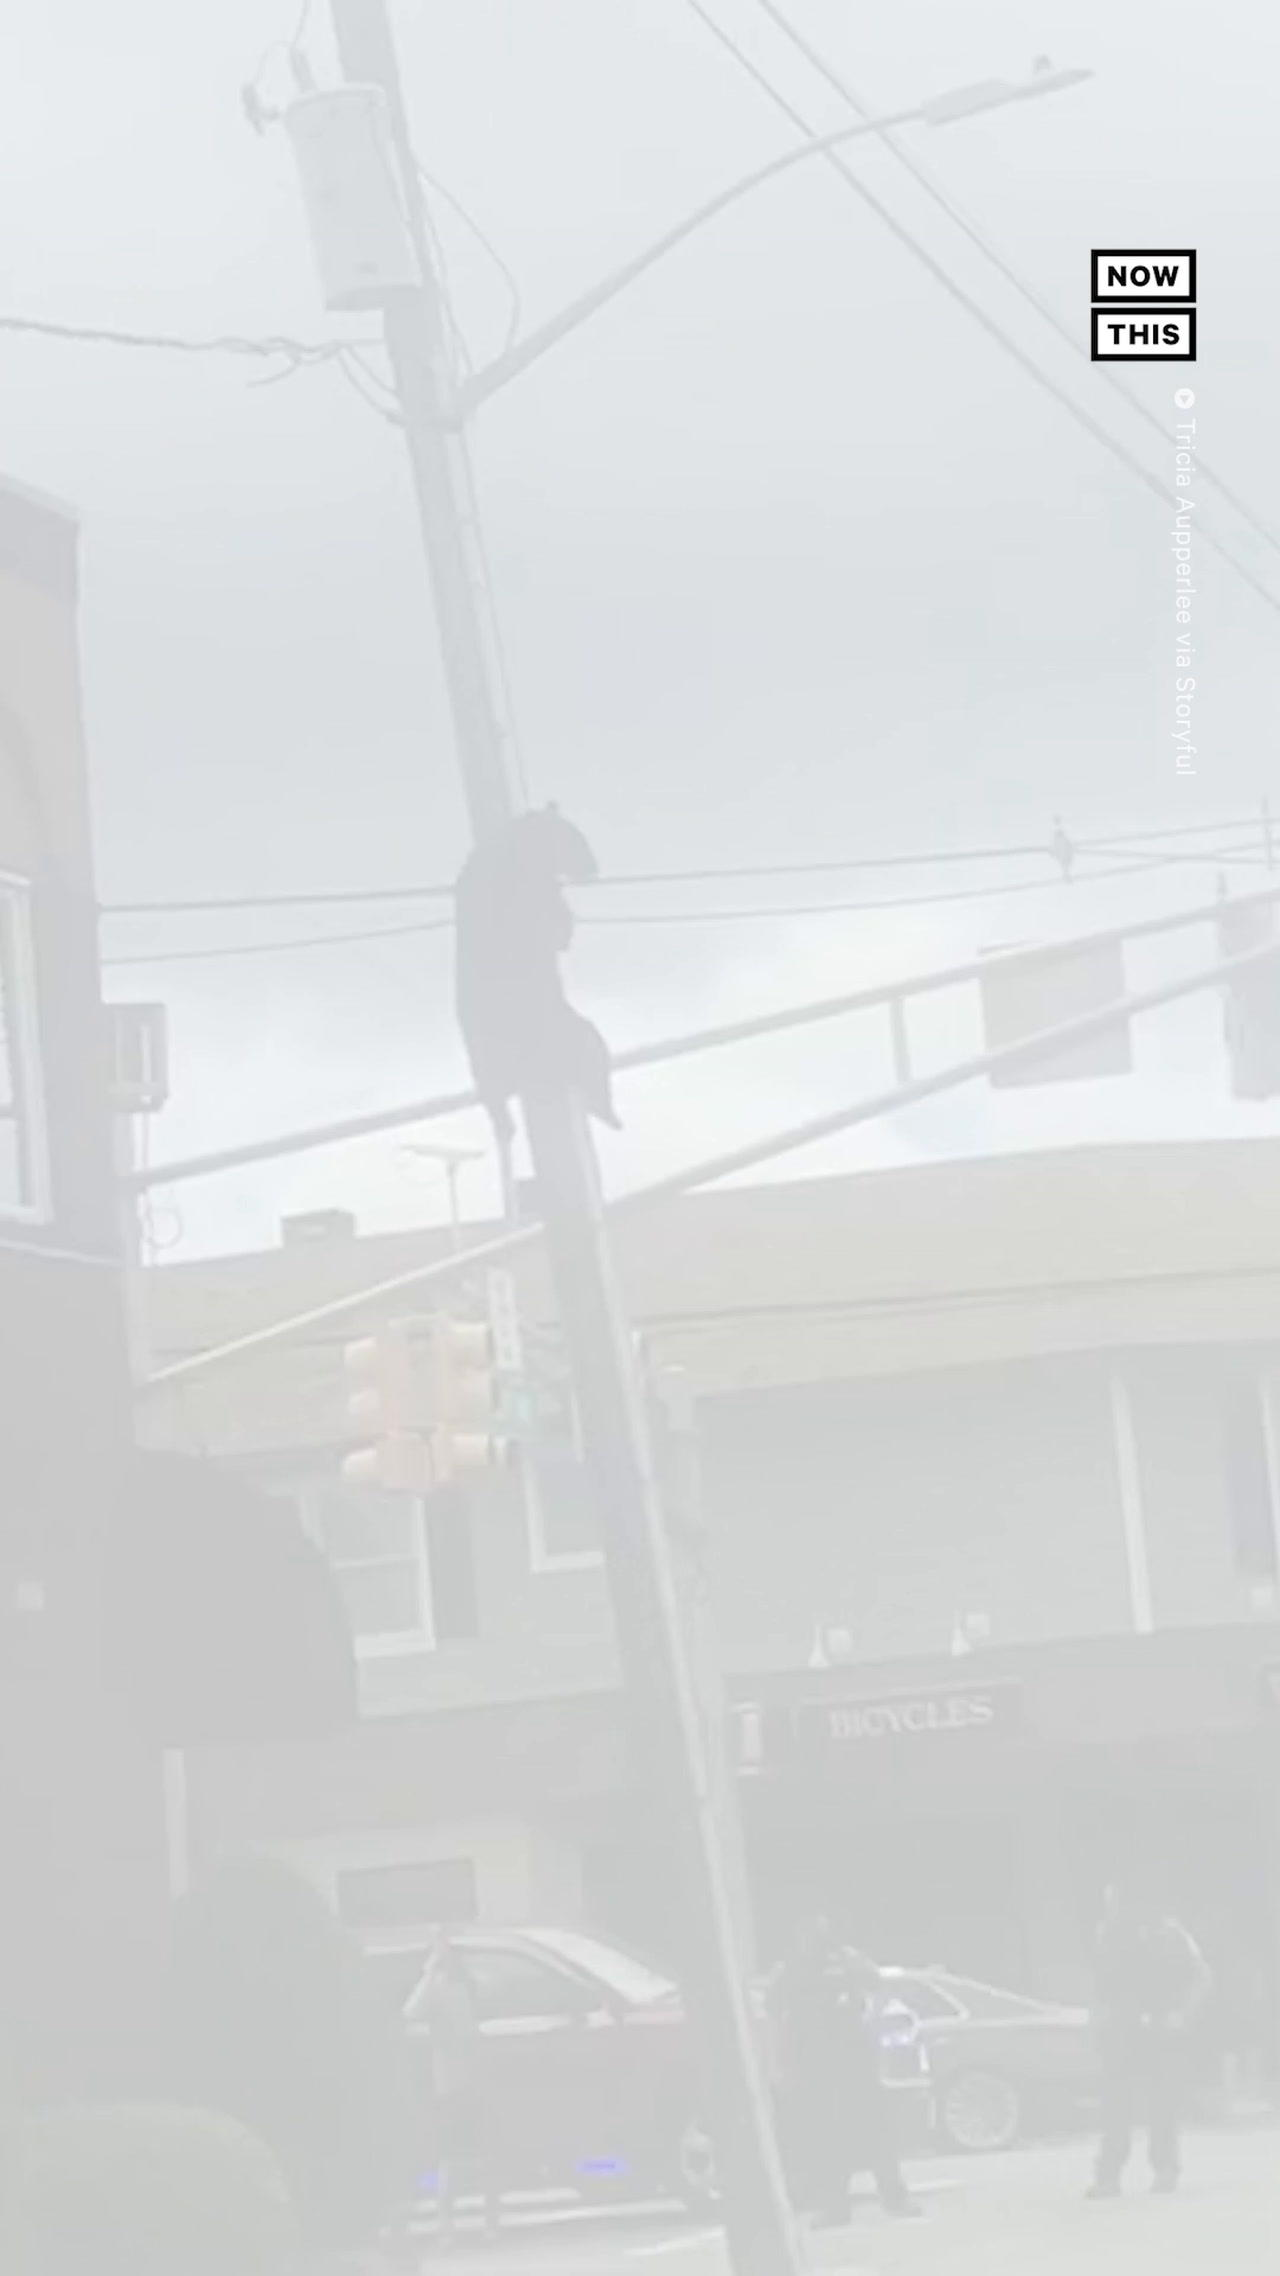 Bear Climbs Utility Pole in New Jersey